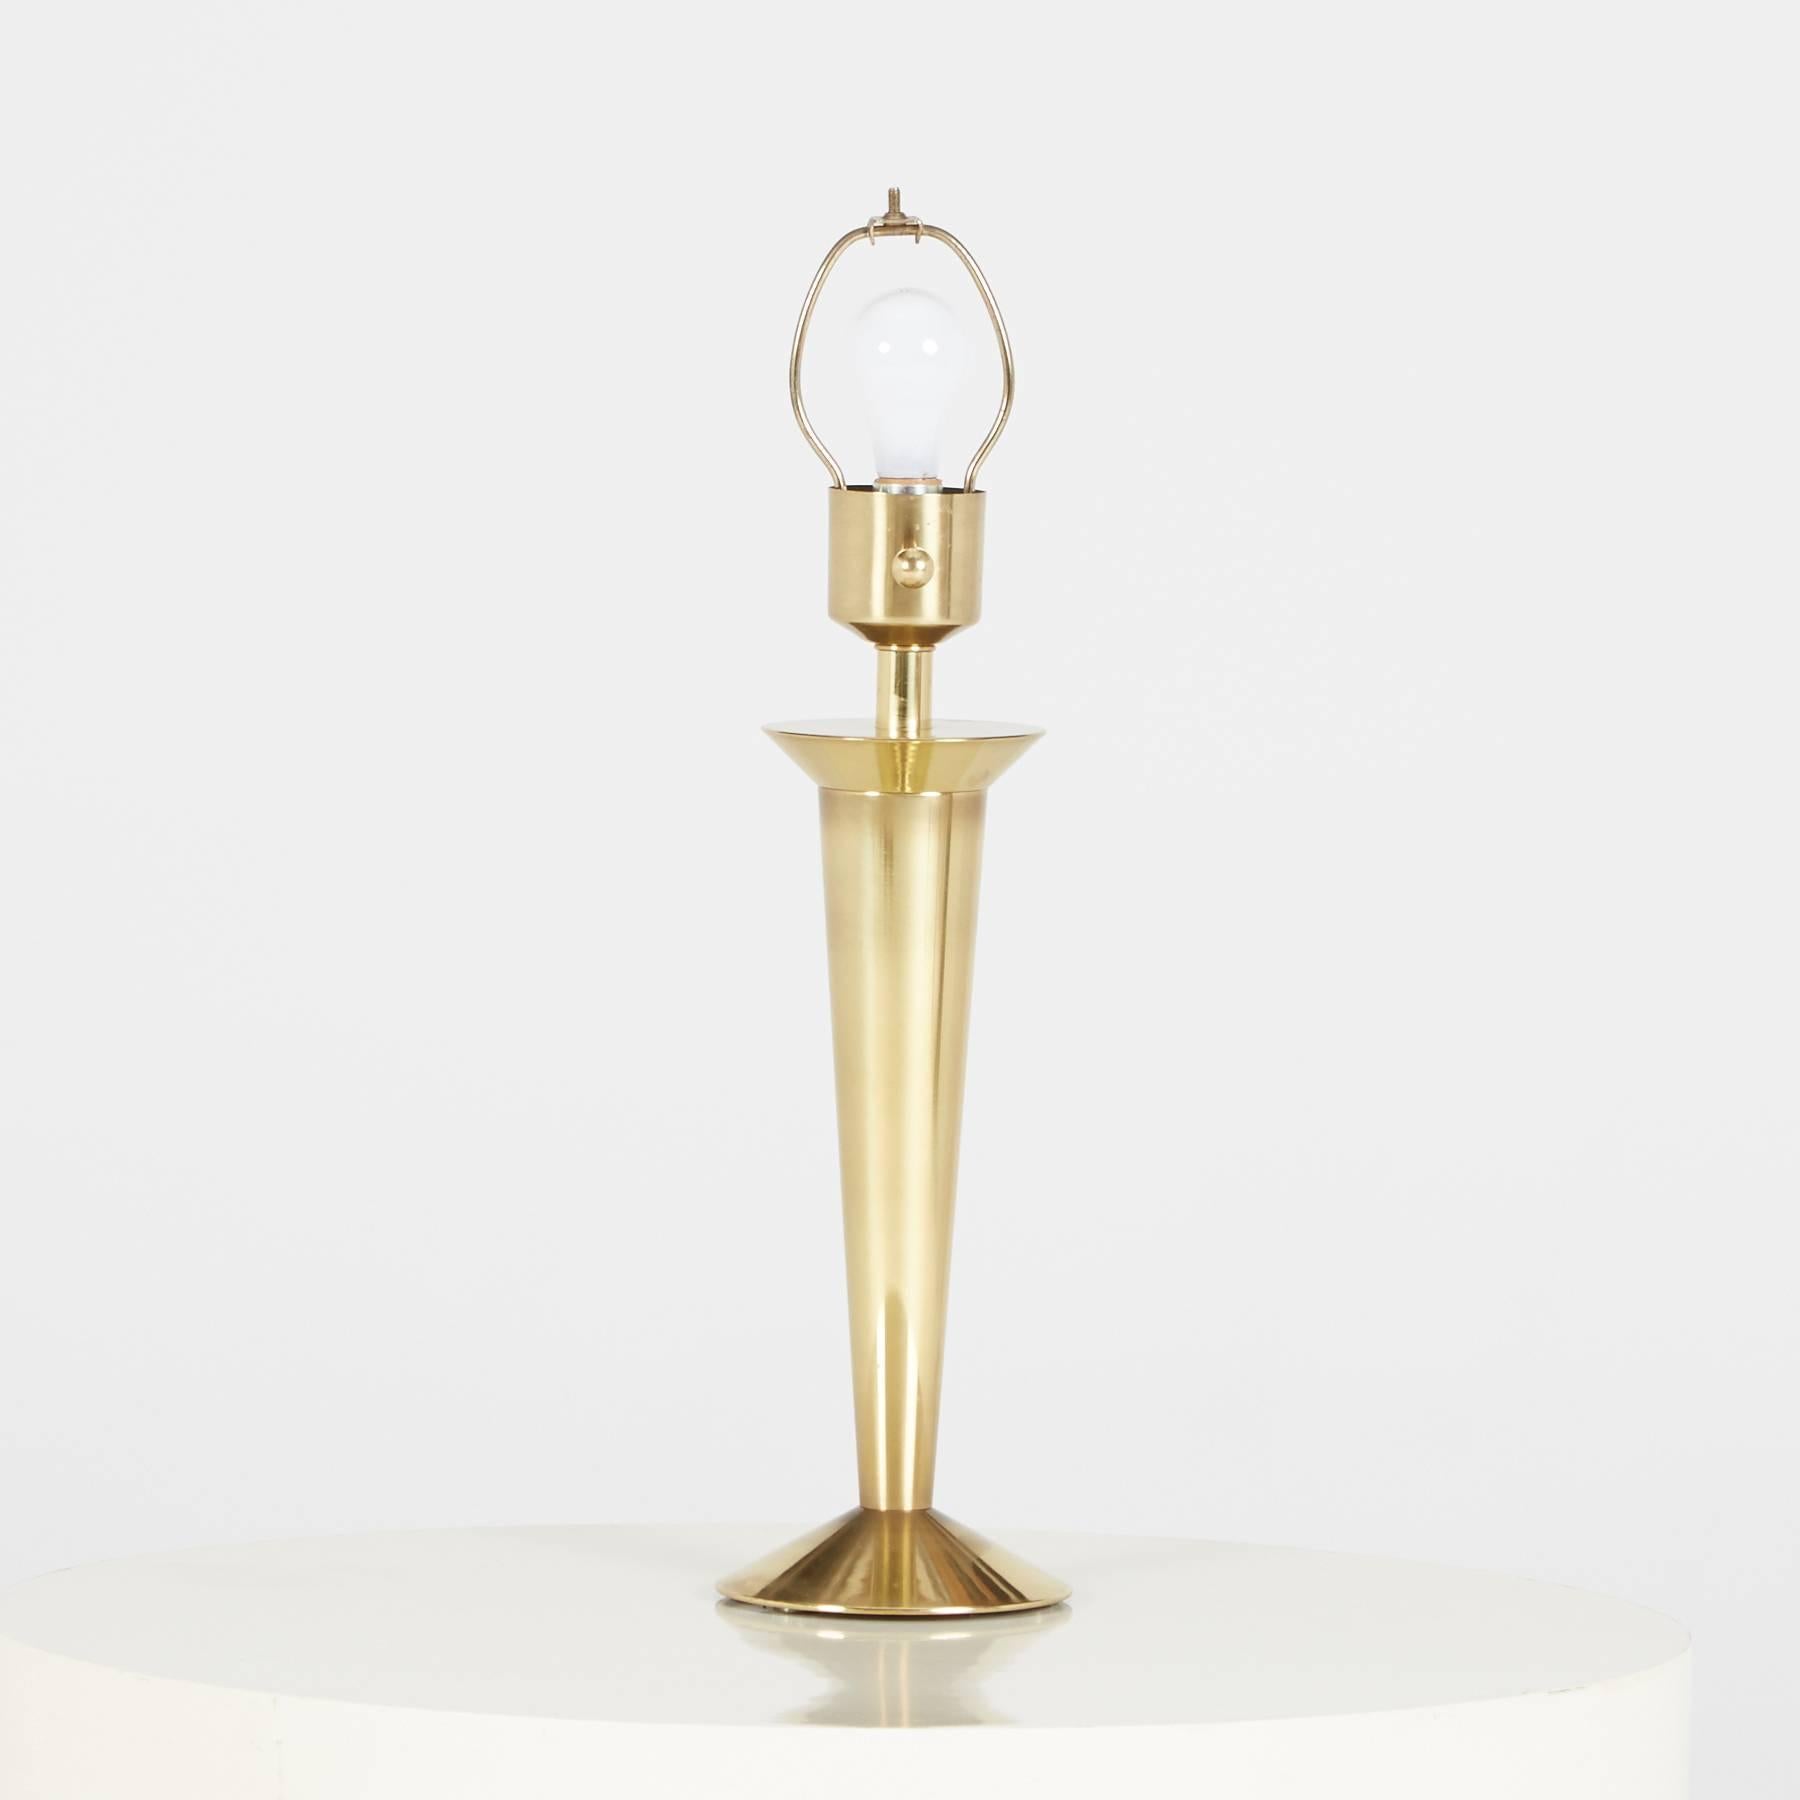 Sleek pair of Hollywood Regency, Art Deco Revival style brass table lamps with white conical shades. Featuring a gleaming brass Silhouette, which when illuminated emanates a dazzling reflection, creating a warm glow. These lamps include round